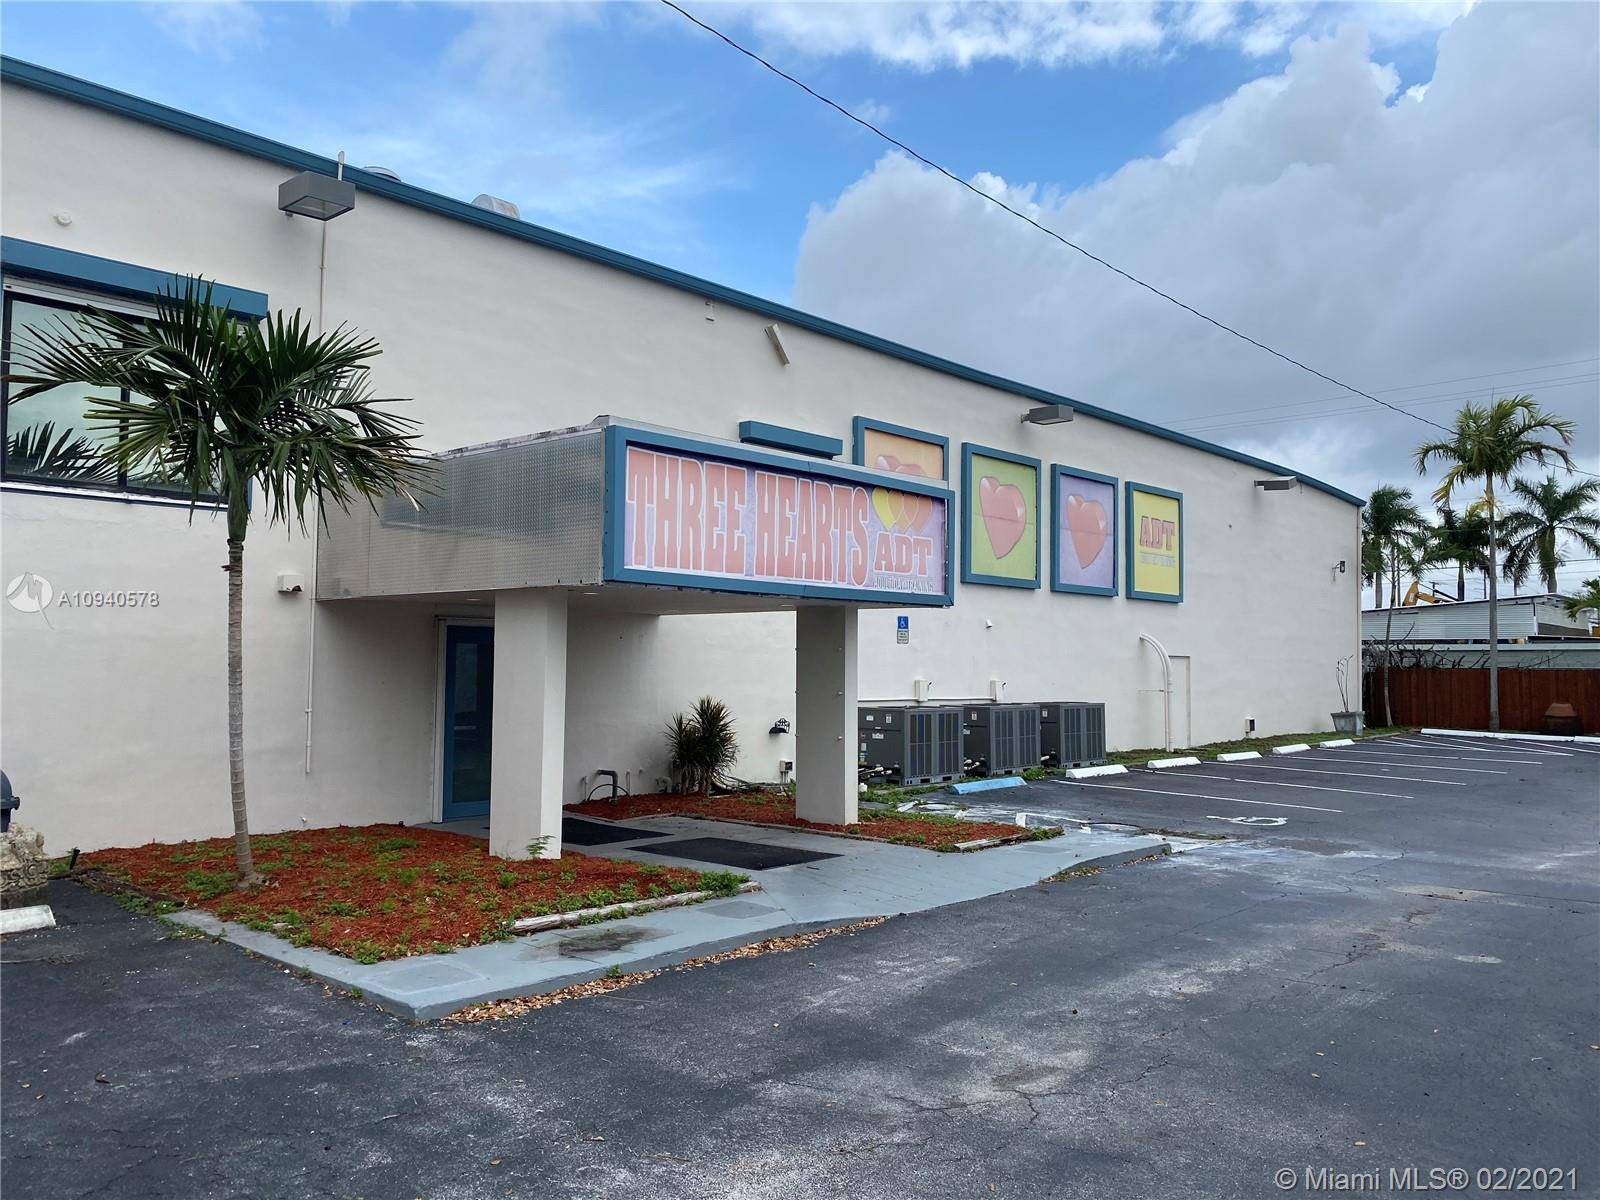 Rare opportunity to lease a fully equipped self contained freestanding office Flex building in East Hollywood Florida.